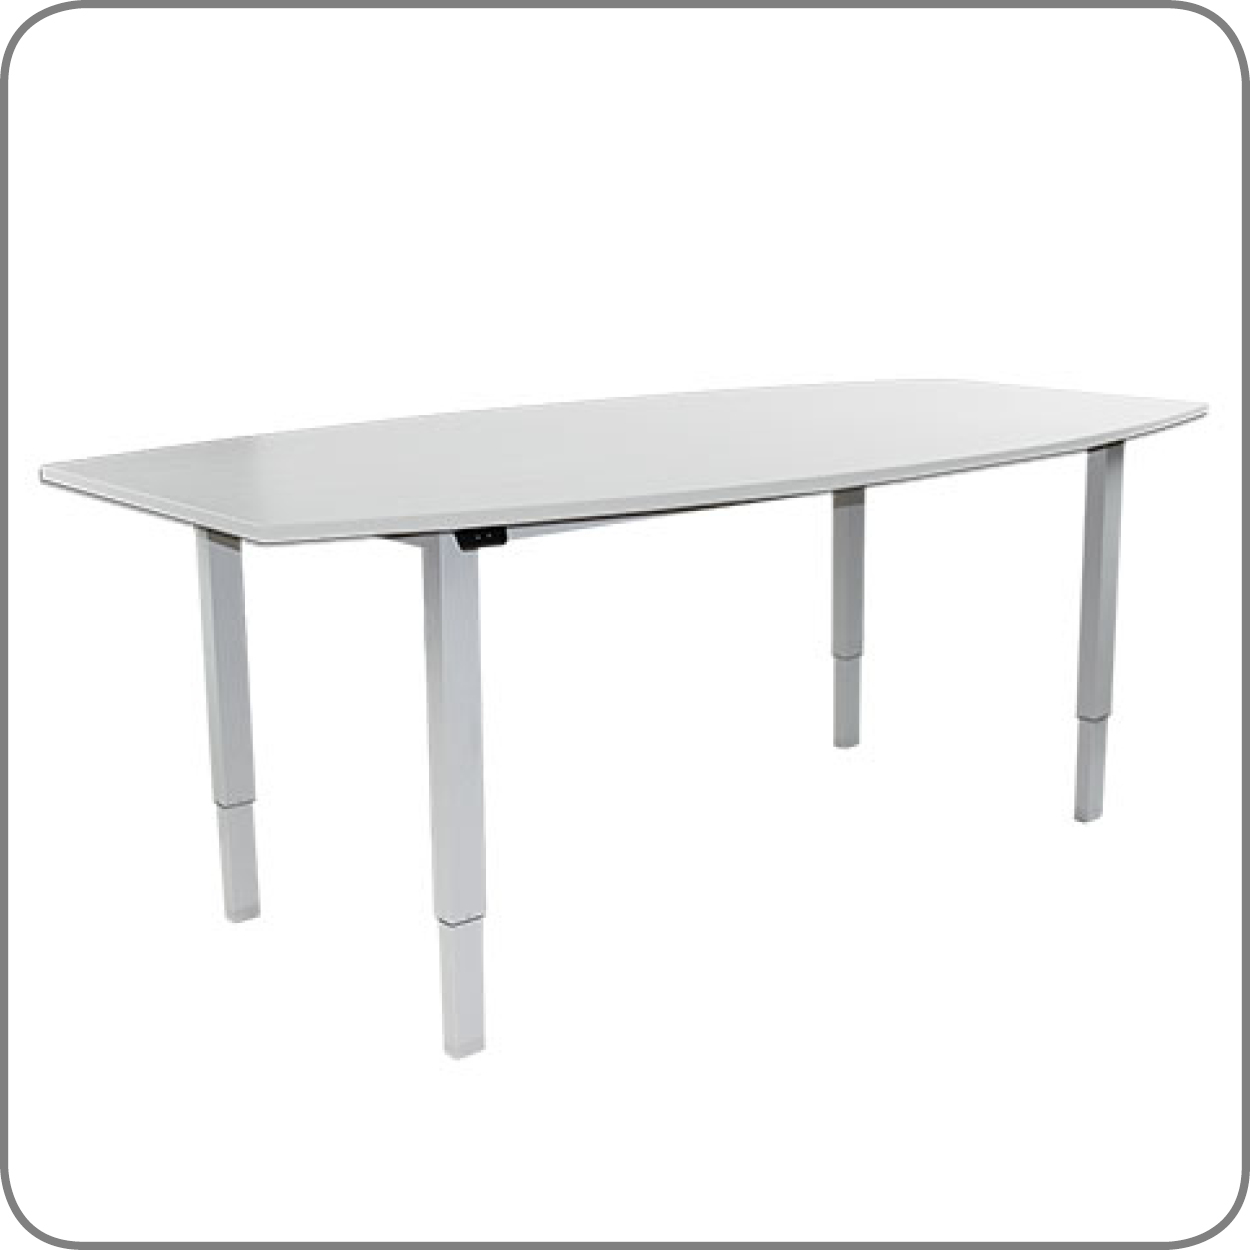 Talkitup! Electric Height Adjustable Meeting Table